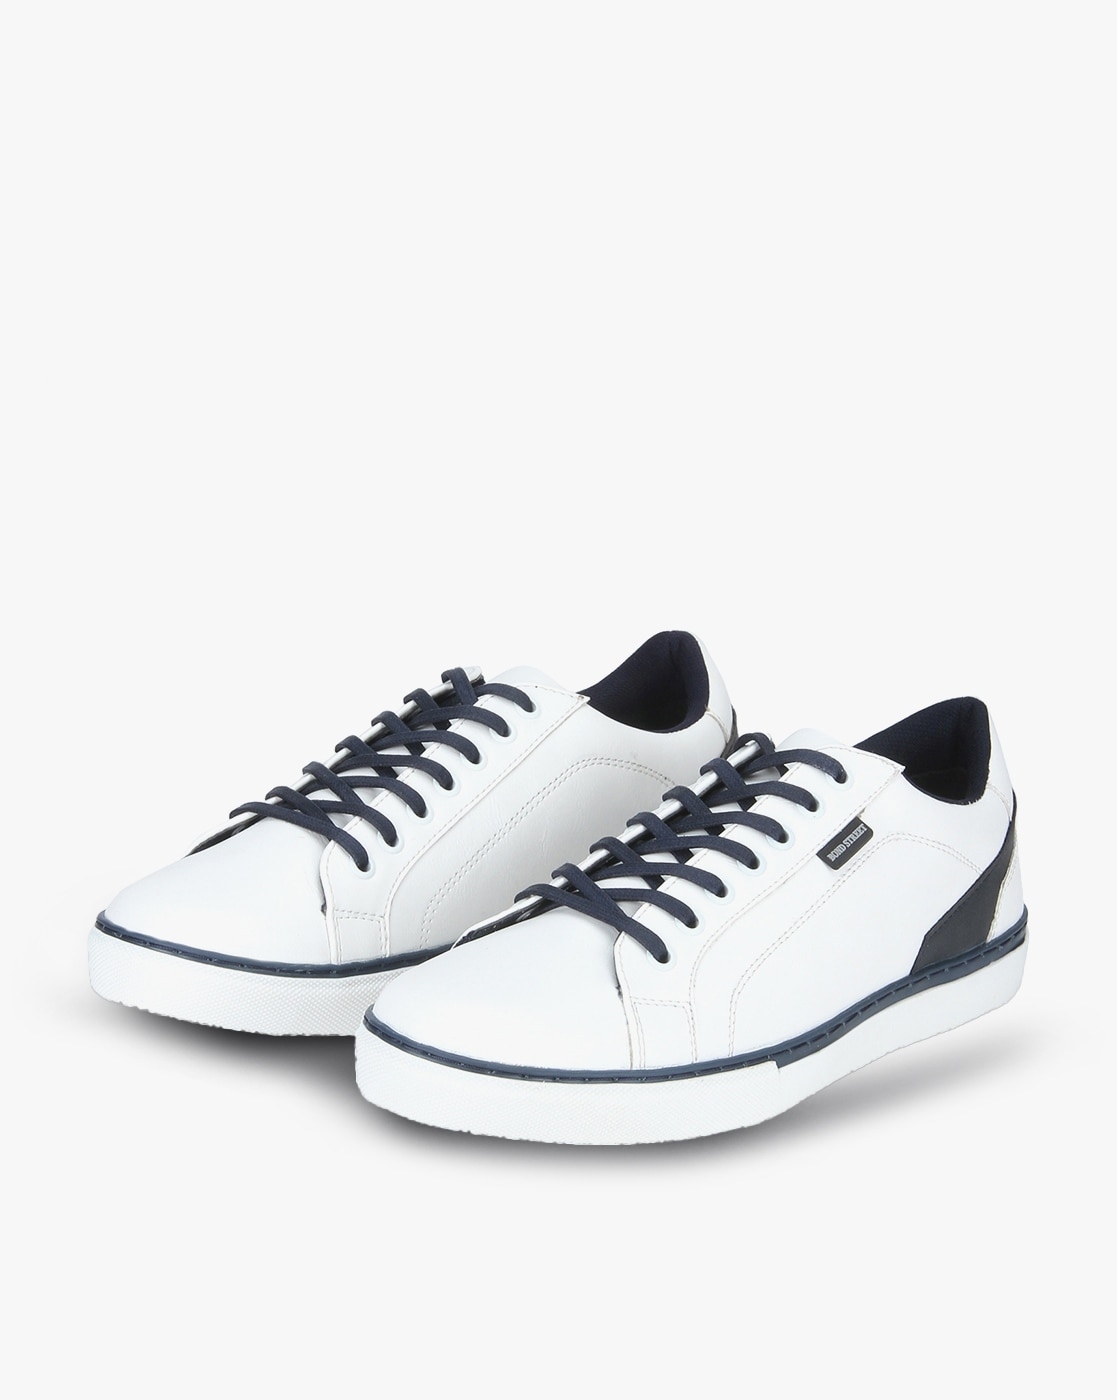 Buy Bond Street by Red Tape Grey & White Sneakers for Men at Best Price @  Tata CLiQ